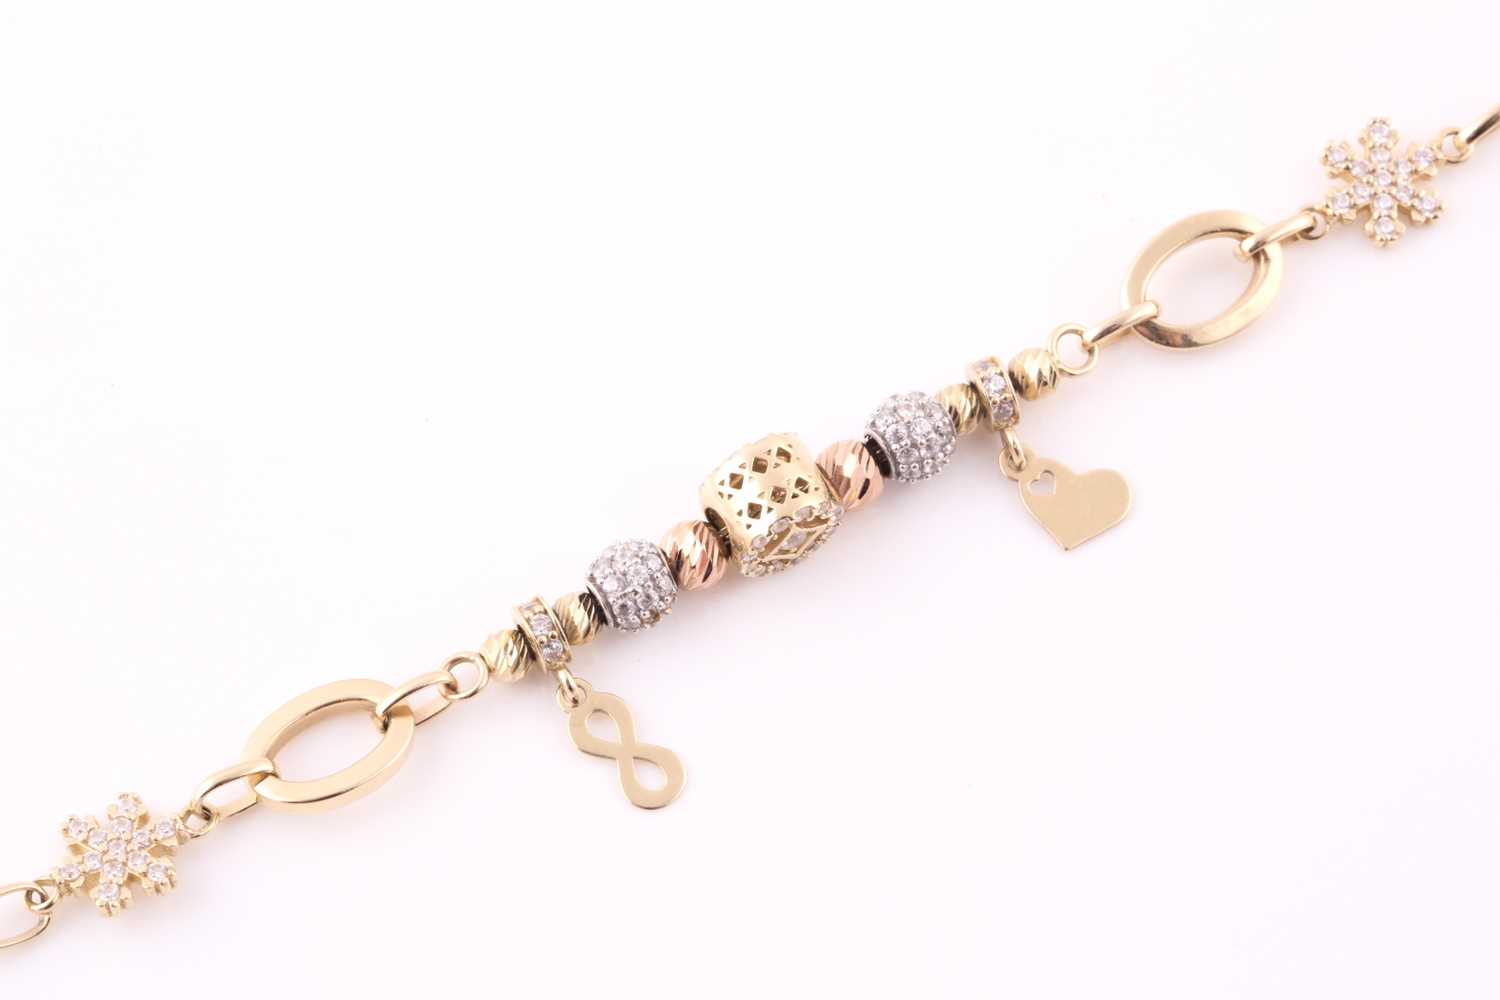 A charm bracelet; the oval link chain strung and suspended with various charms and beads, some set